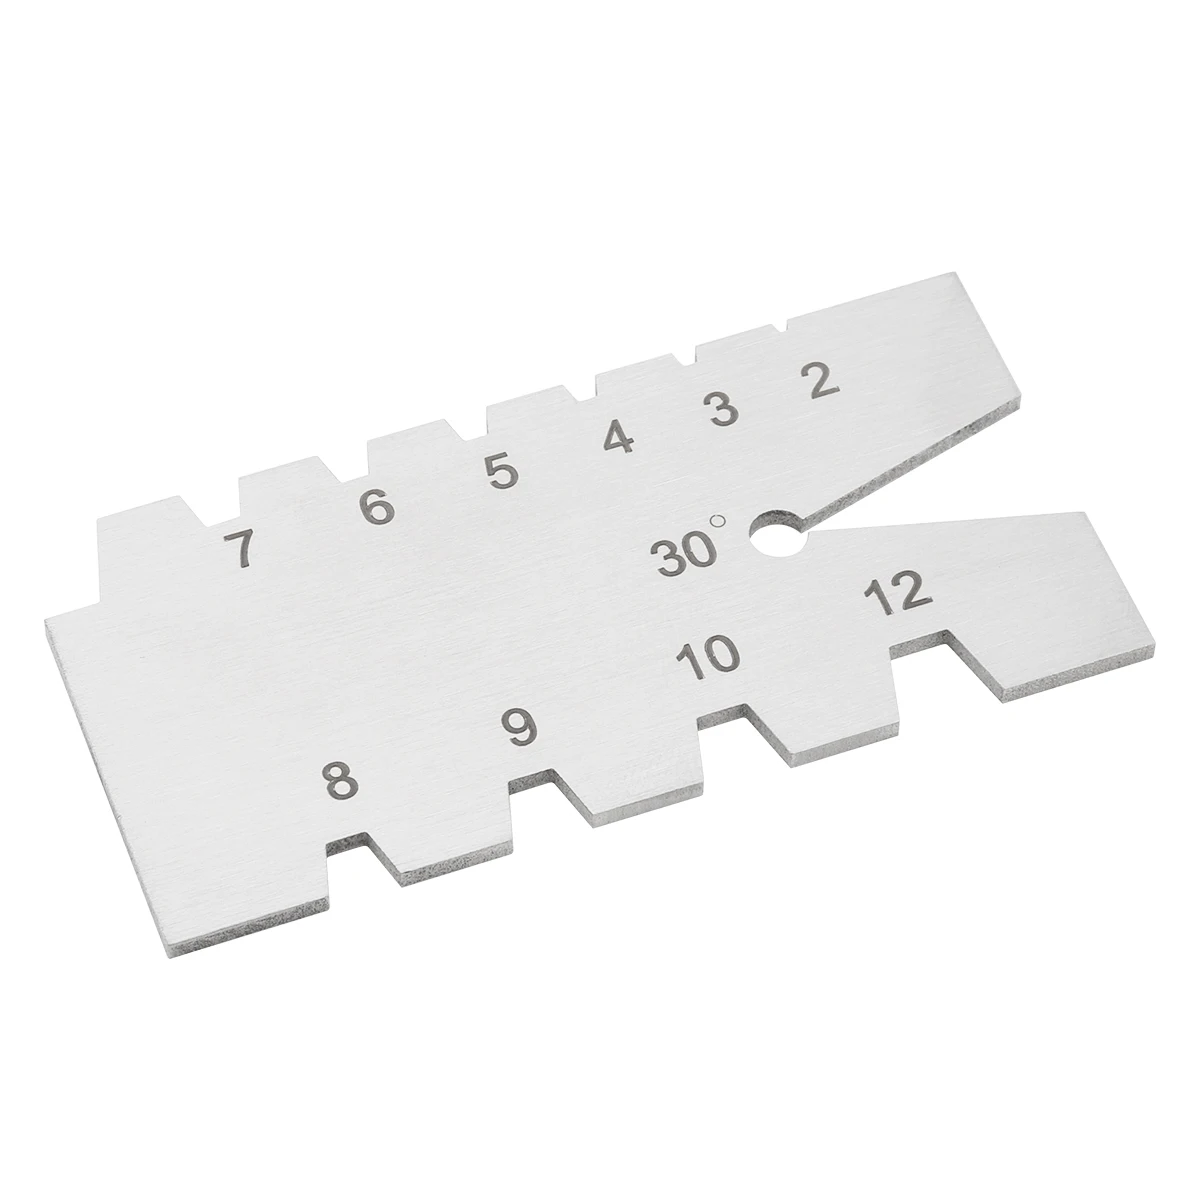 

Acme Screw Thread Gage Angle Gauge Template 29° 30° Thread Gauge Stainless Steel Screw Angle Template Gage Inspection Too